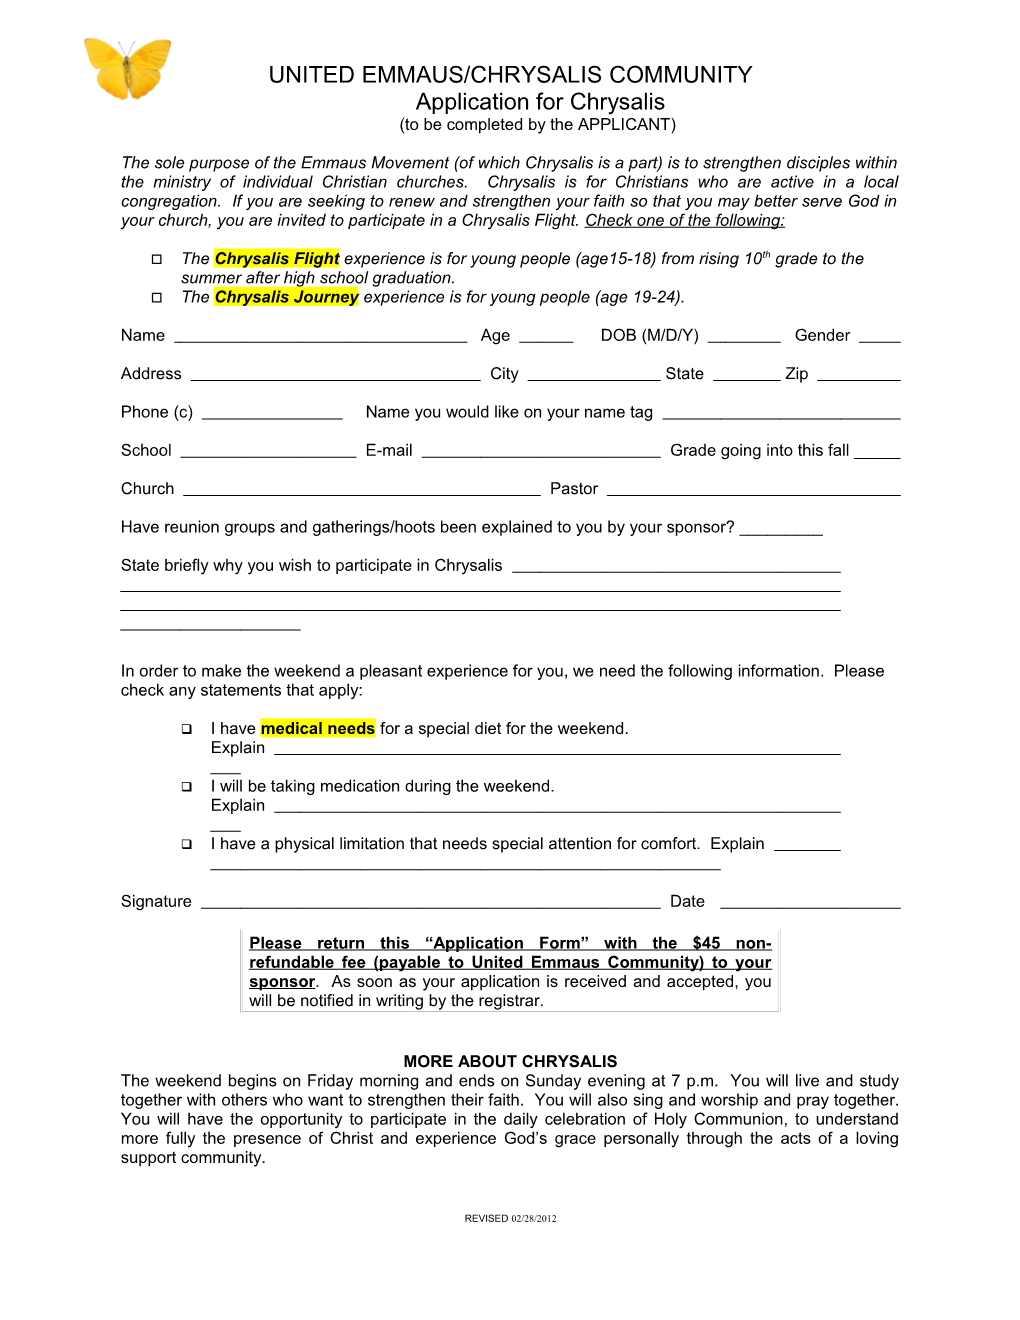 Do Not Give This Sheet to the Applicant